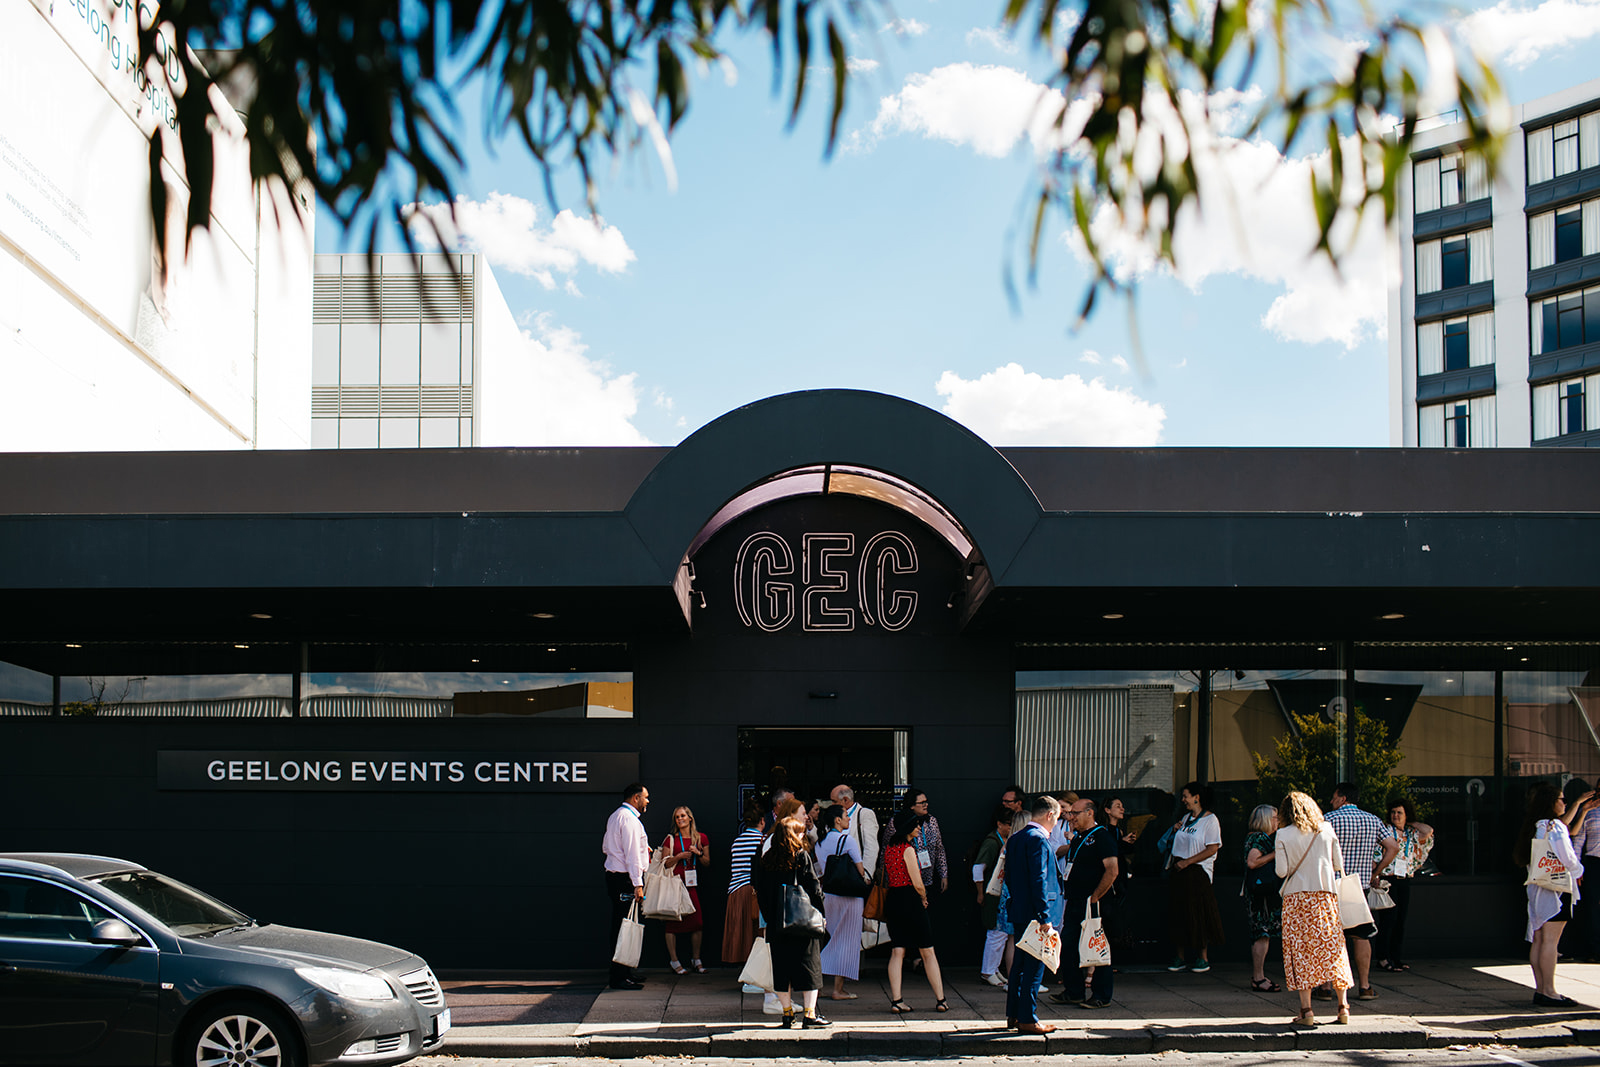 Geelong events centre